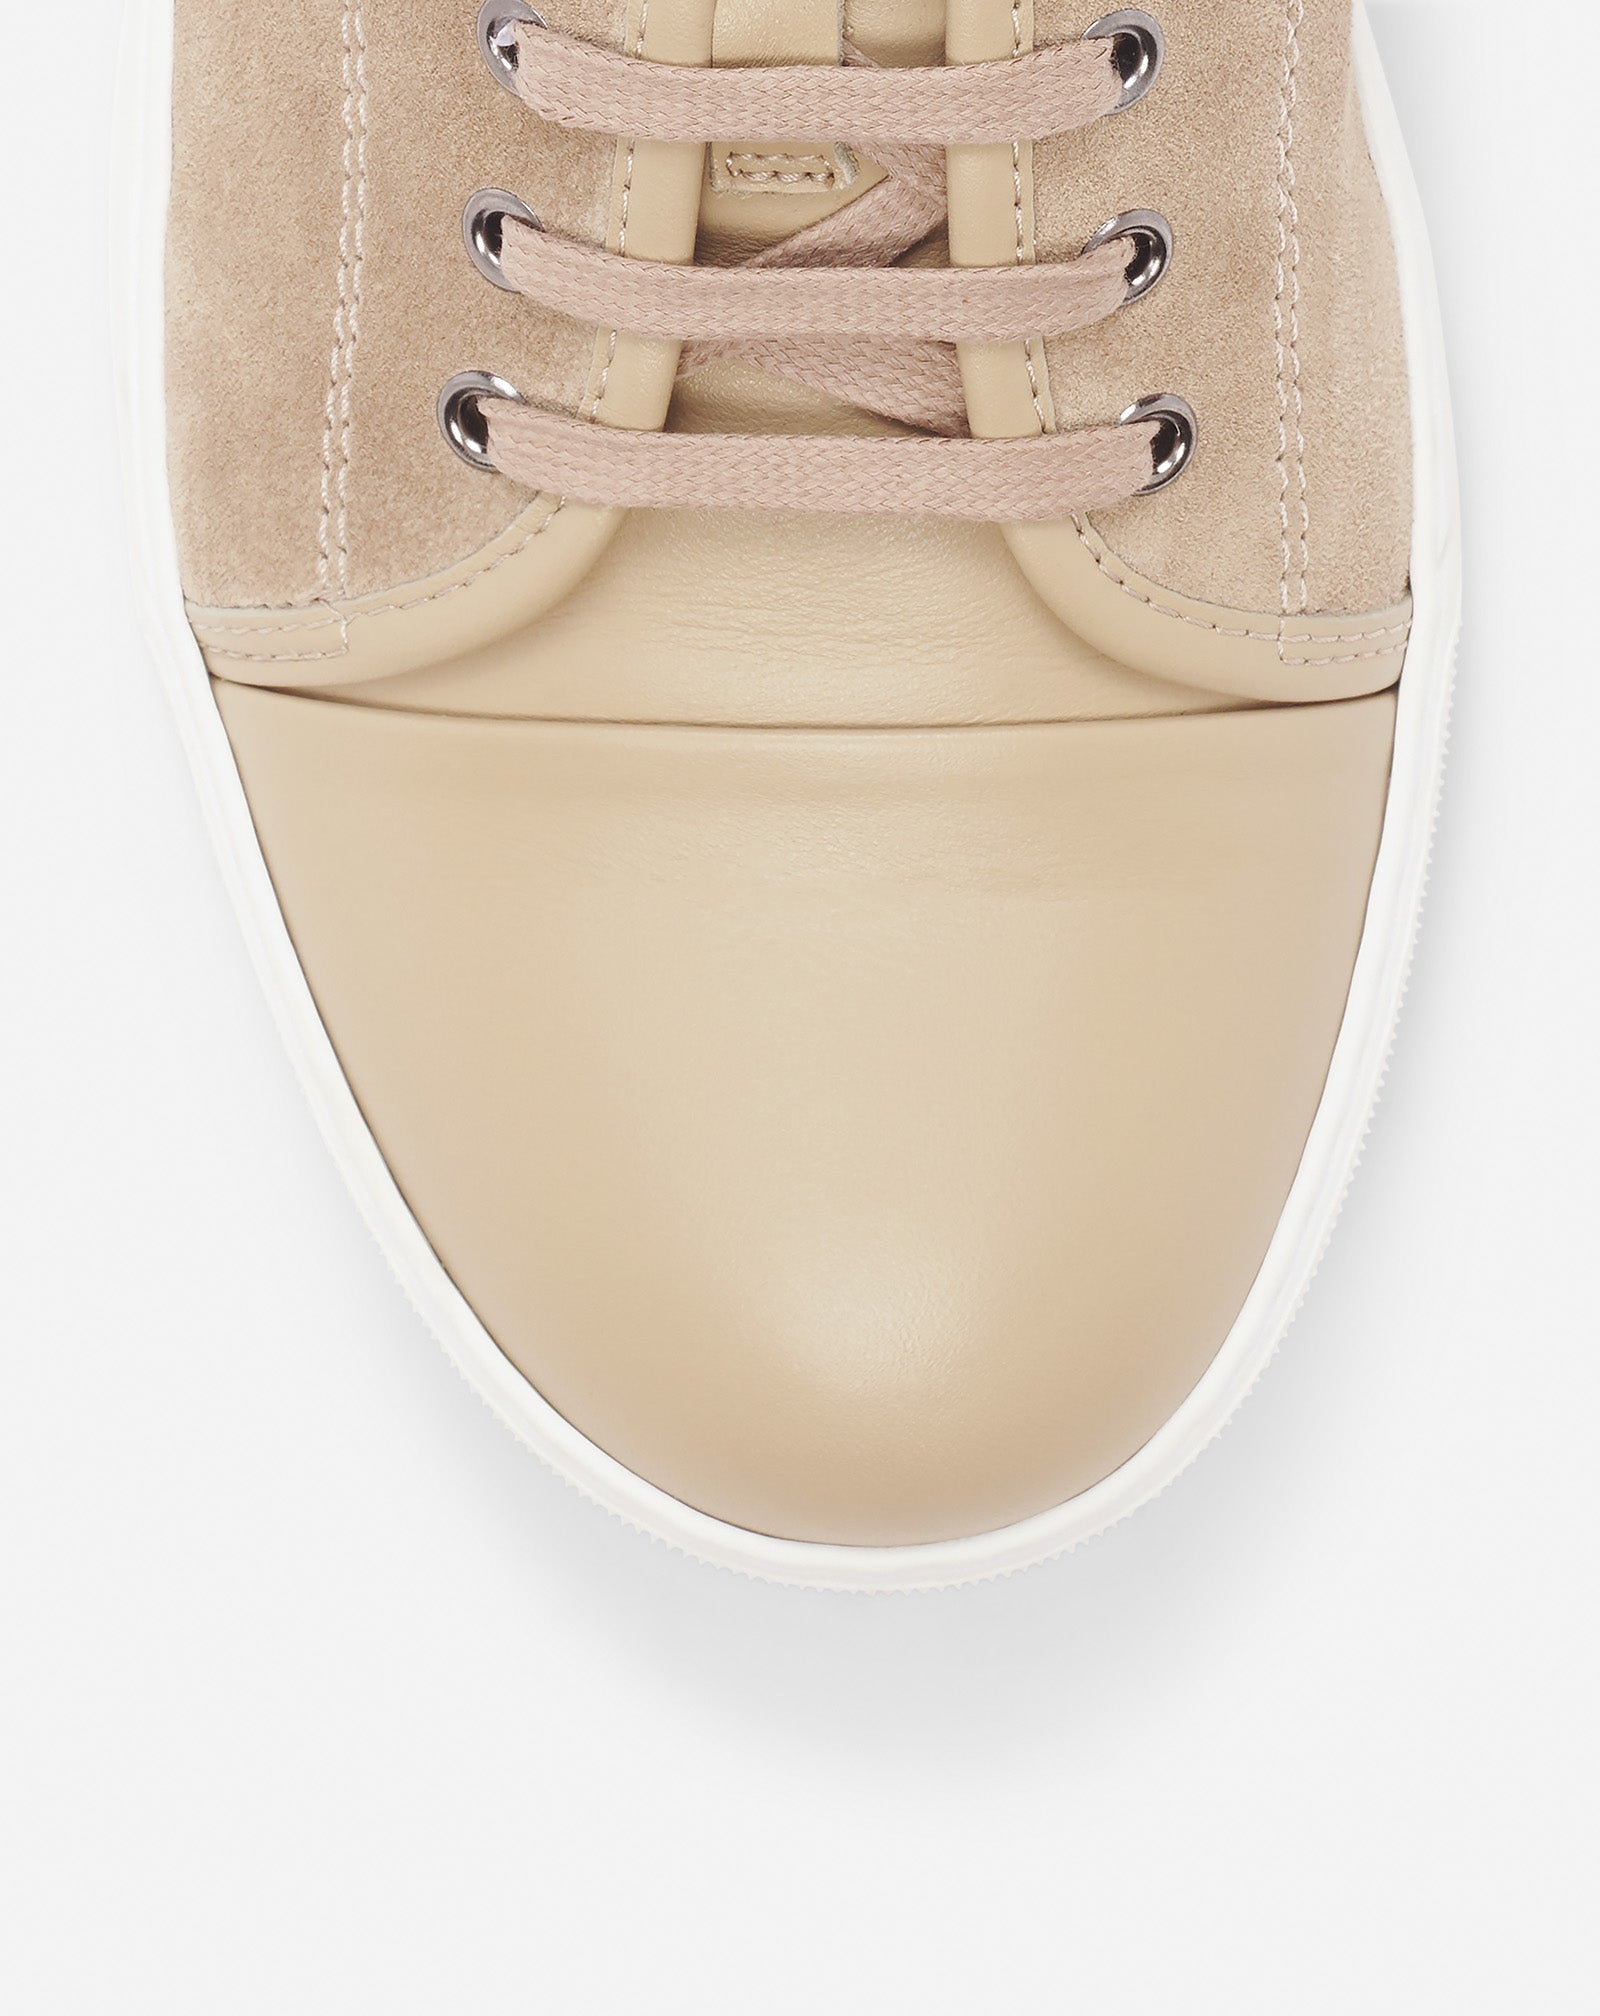 DBB1 LEATHER AND SUEDE SNEAKERS, TAUPE